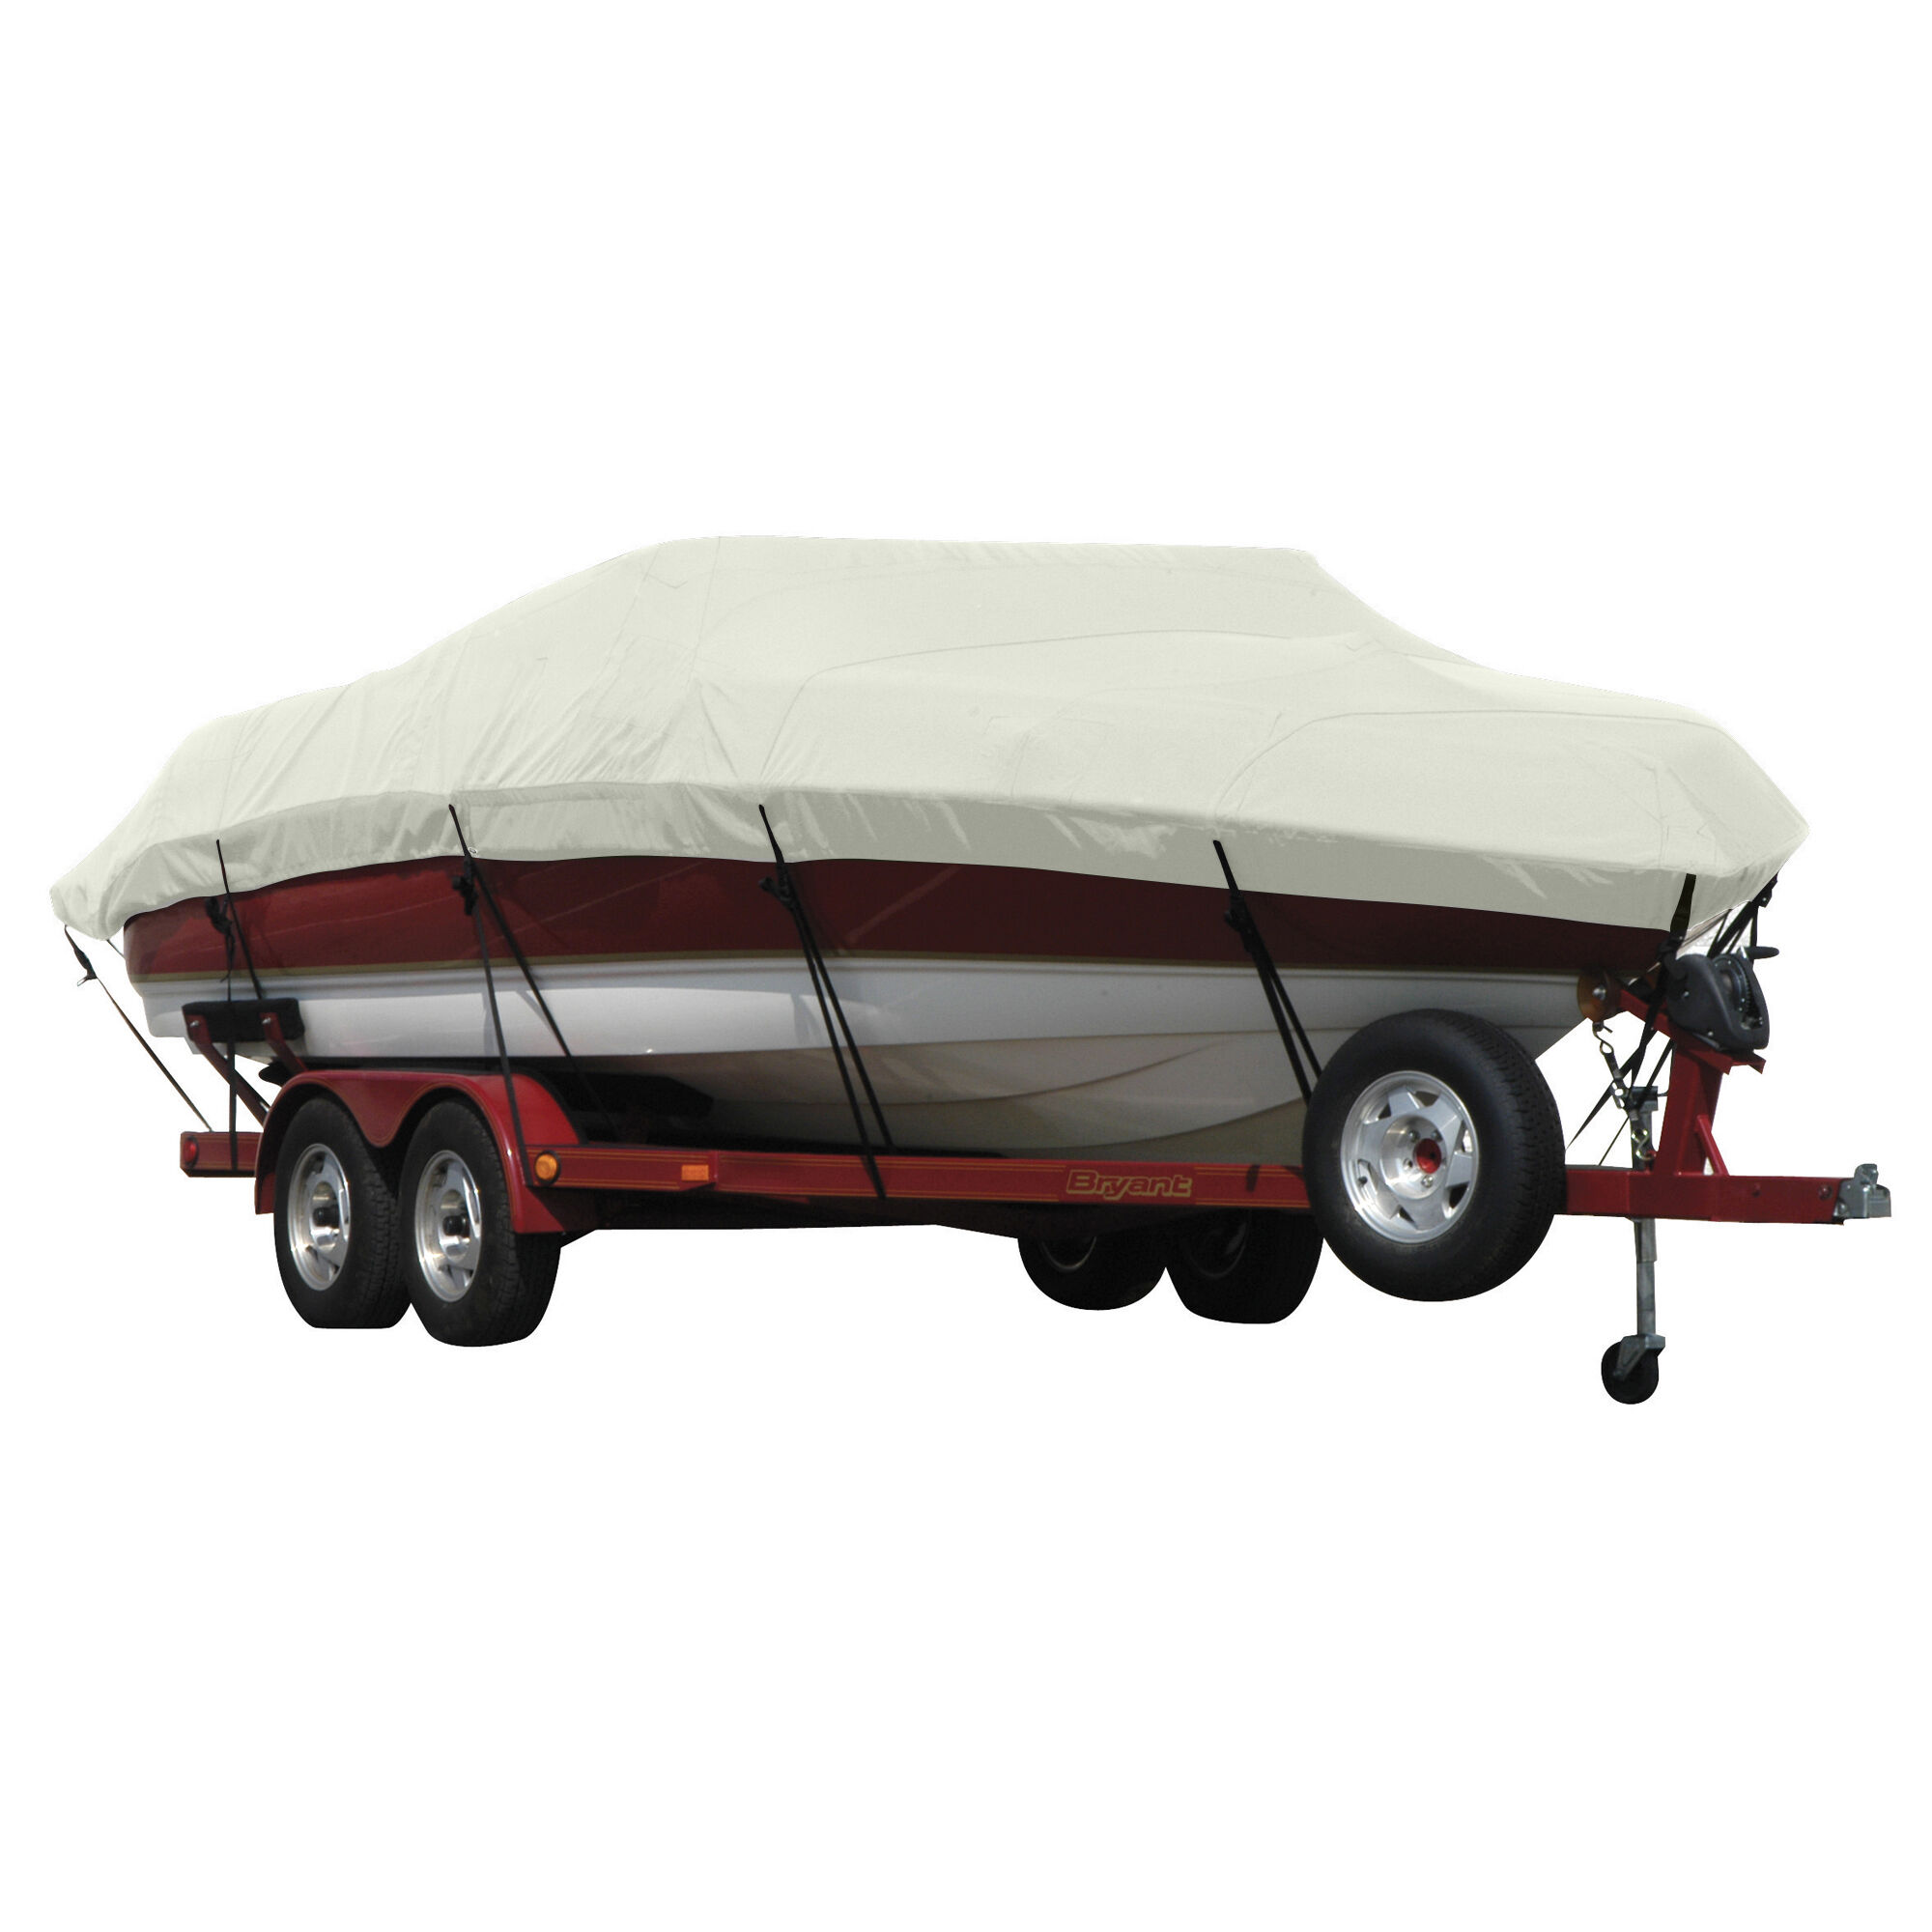 Covermate Exact Fit Sunbrella Boat Cover for Tige 24 Ve 24 Ve w/ Factory Tower Does Not Cover PLATFORMm I/O. Silver